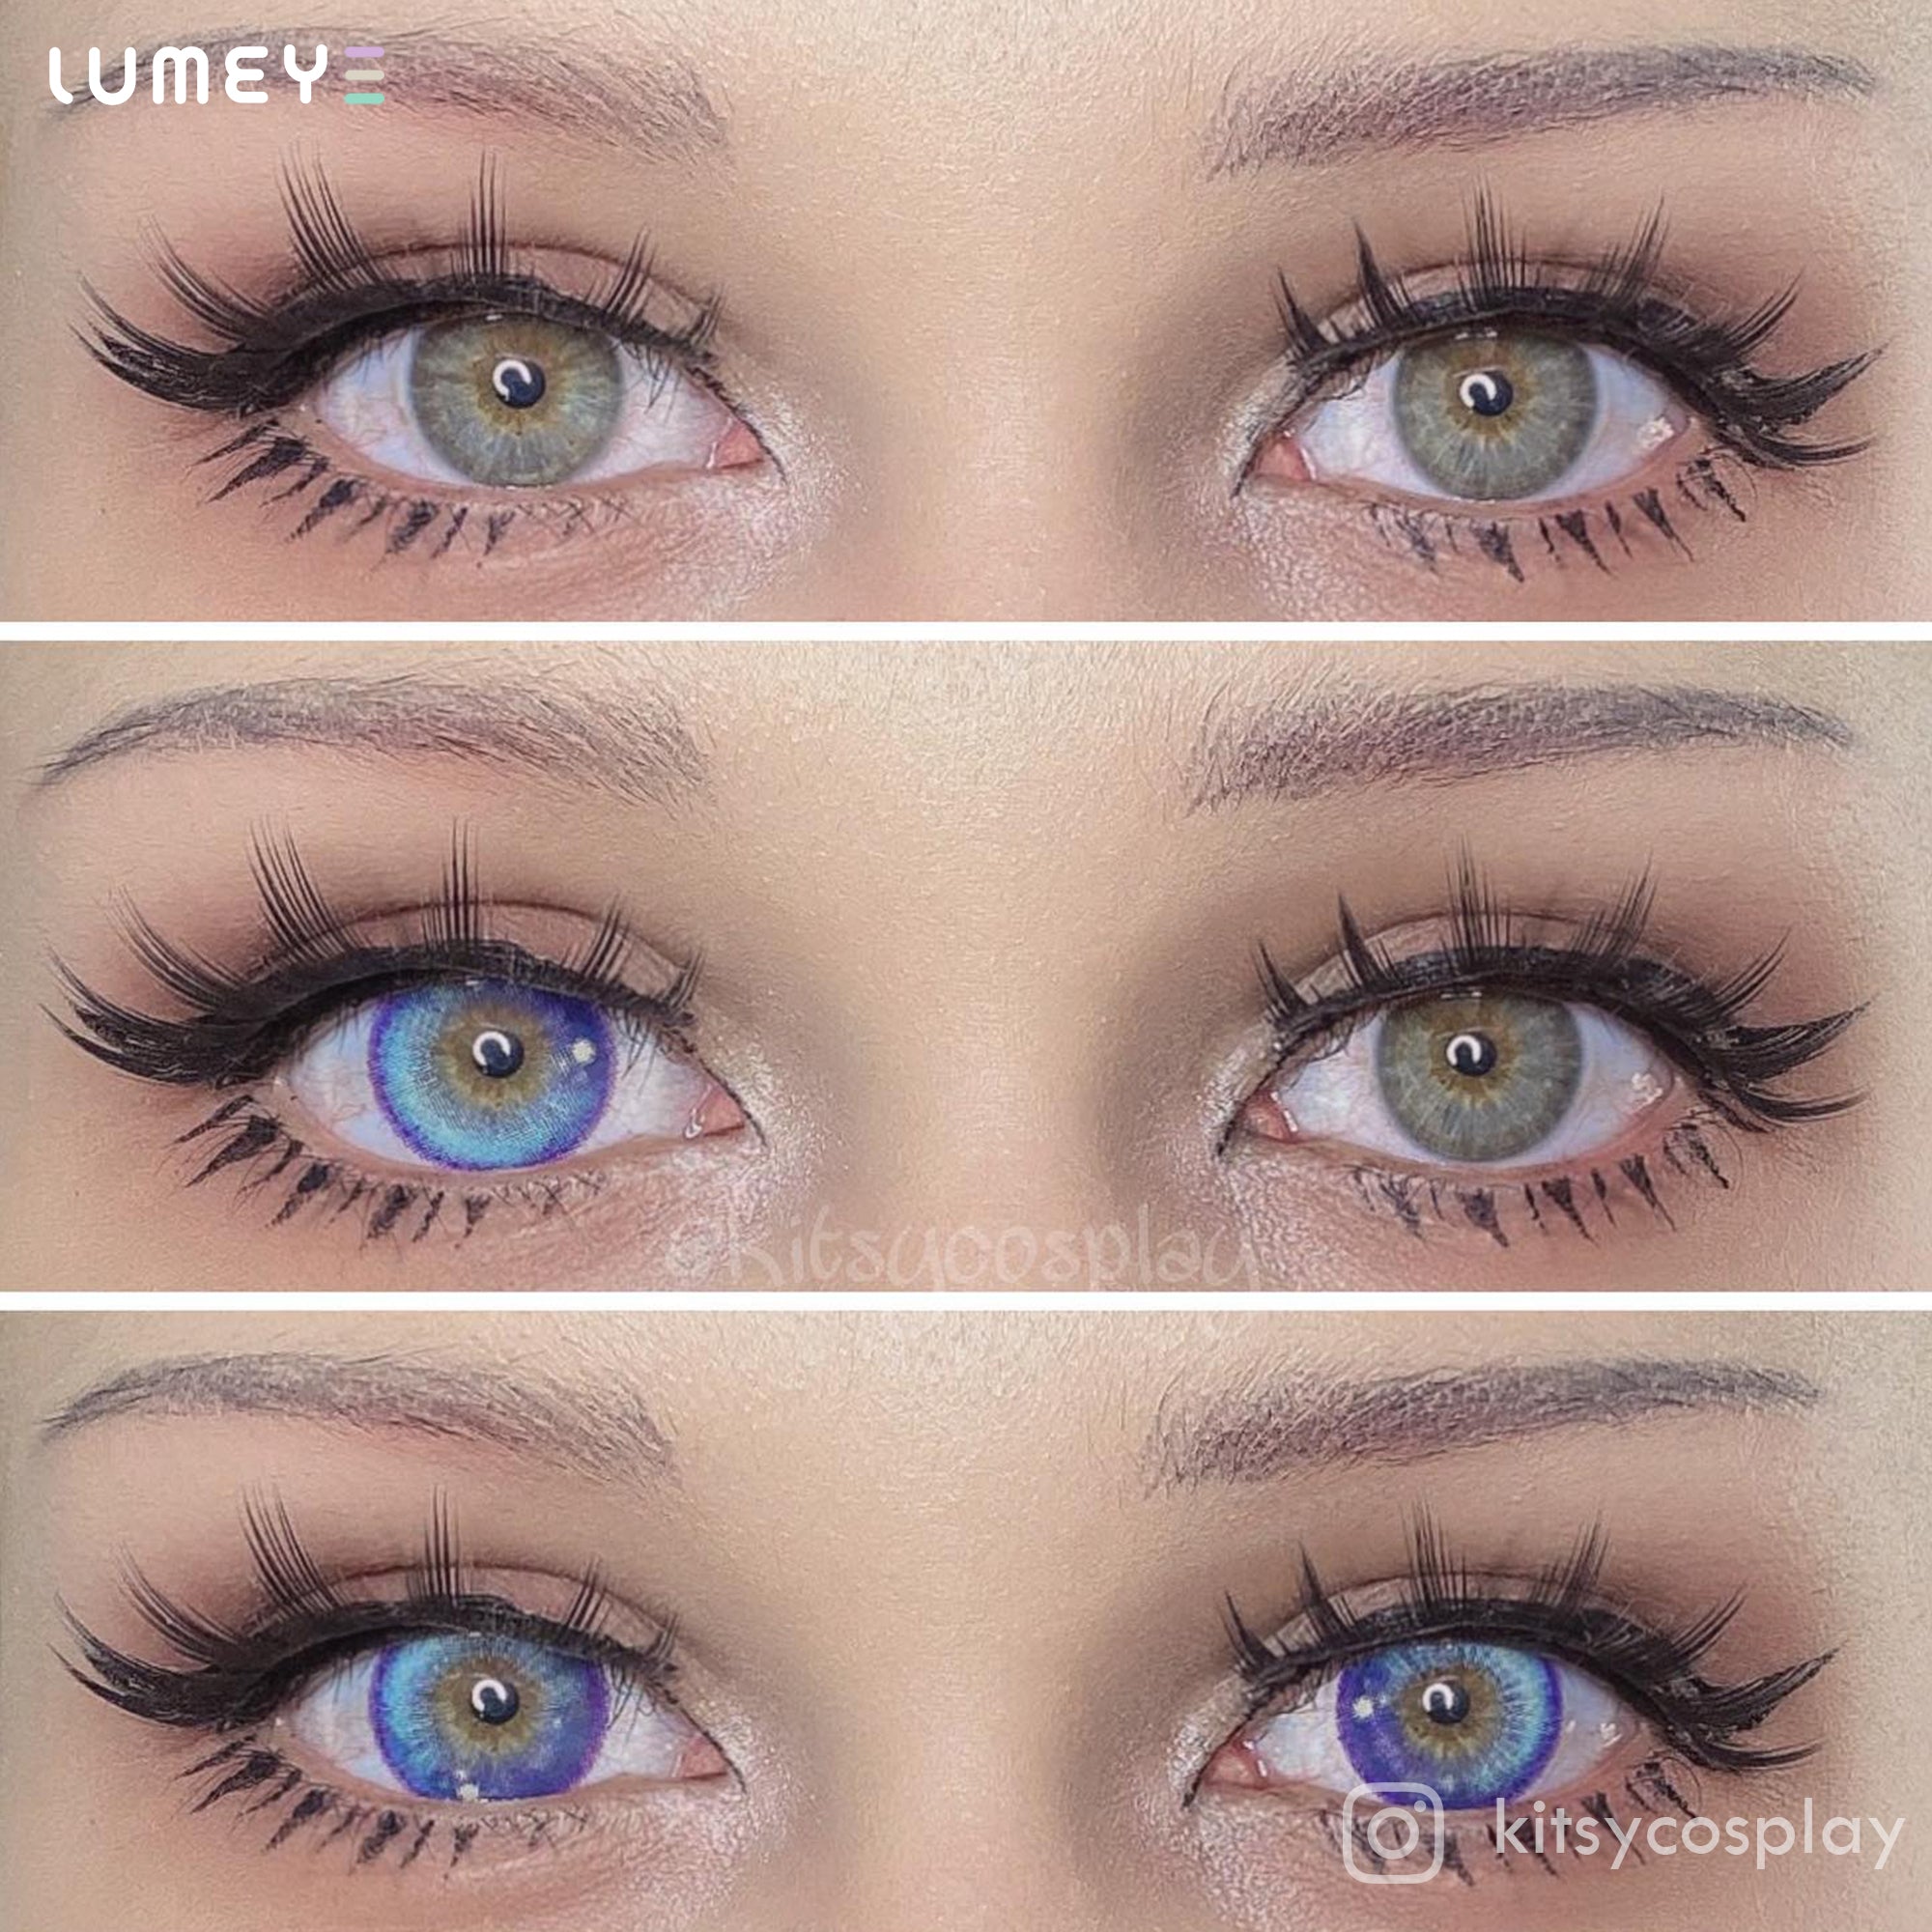 LUMEYE Anime Blue Colored Contact Lenses | LUMEYE